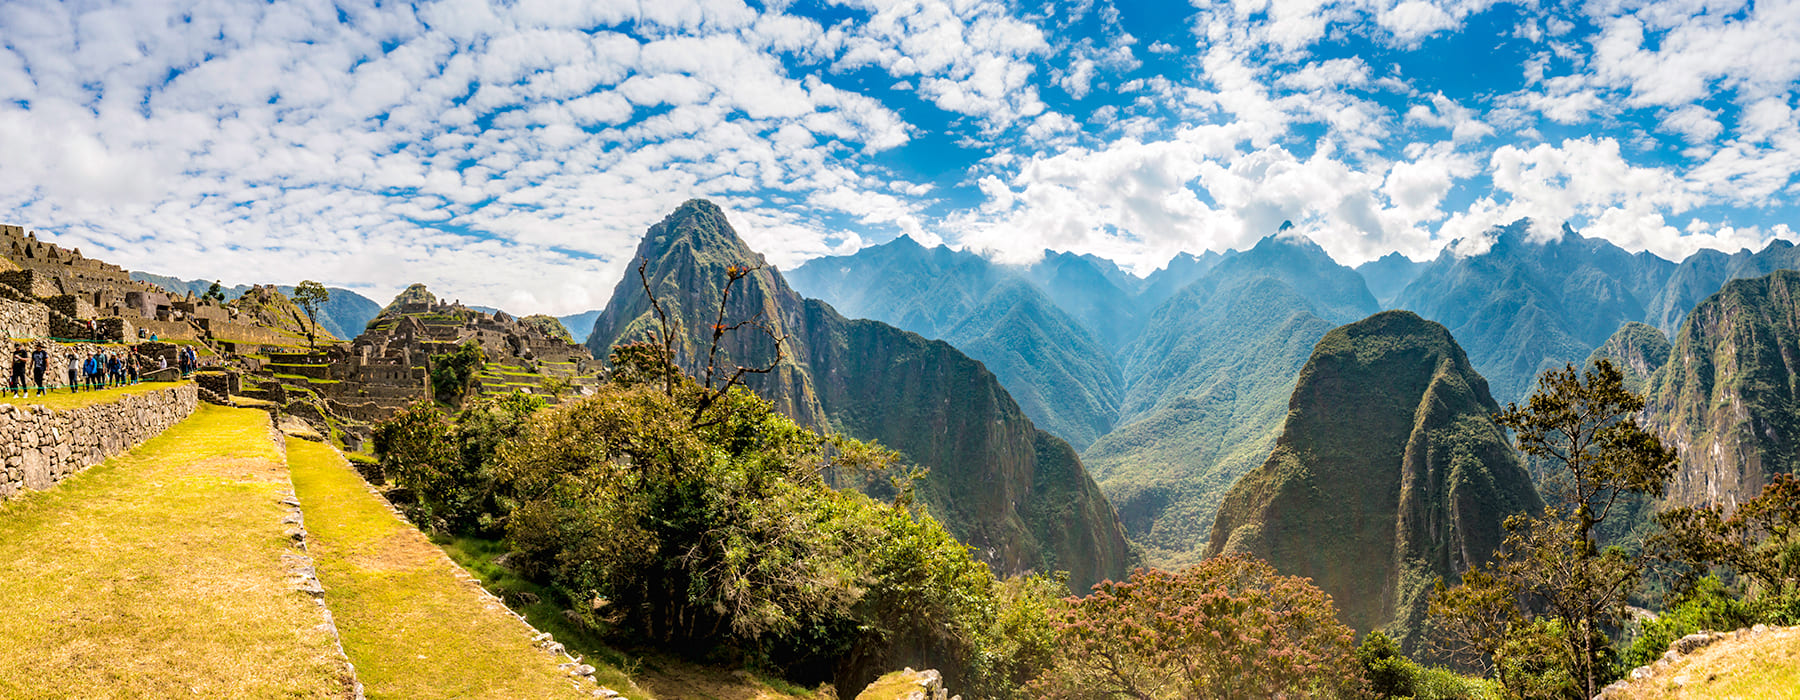 HOW LONG IS THE INCA TRAIL HIKE?